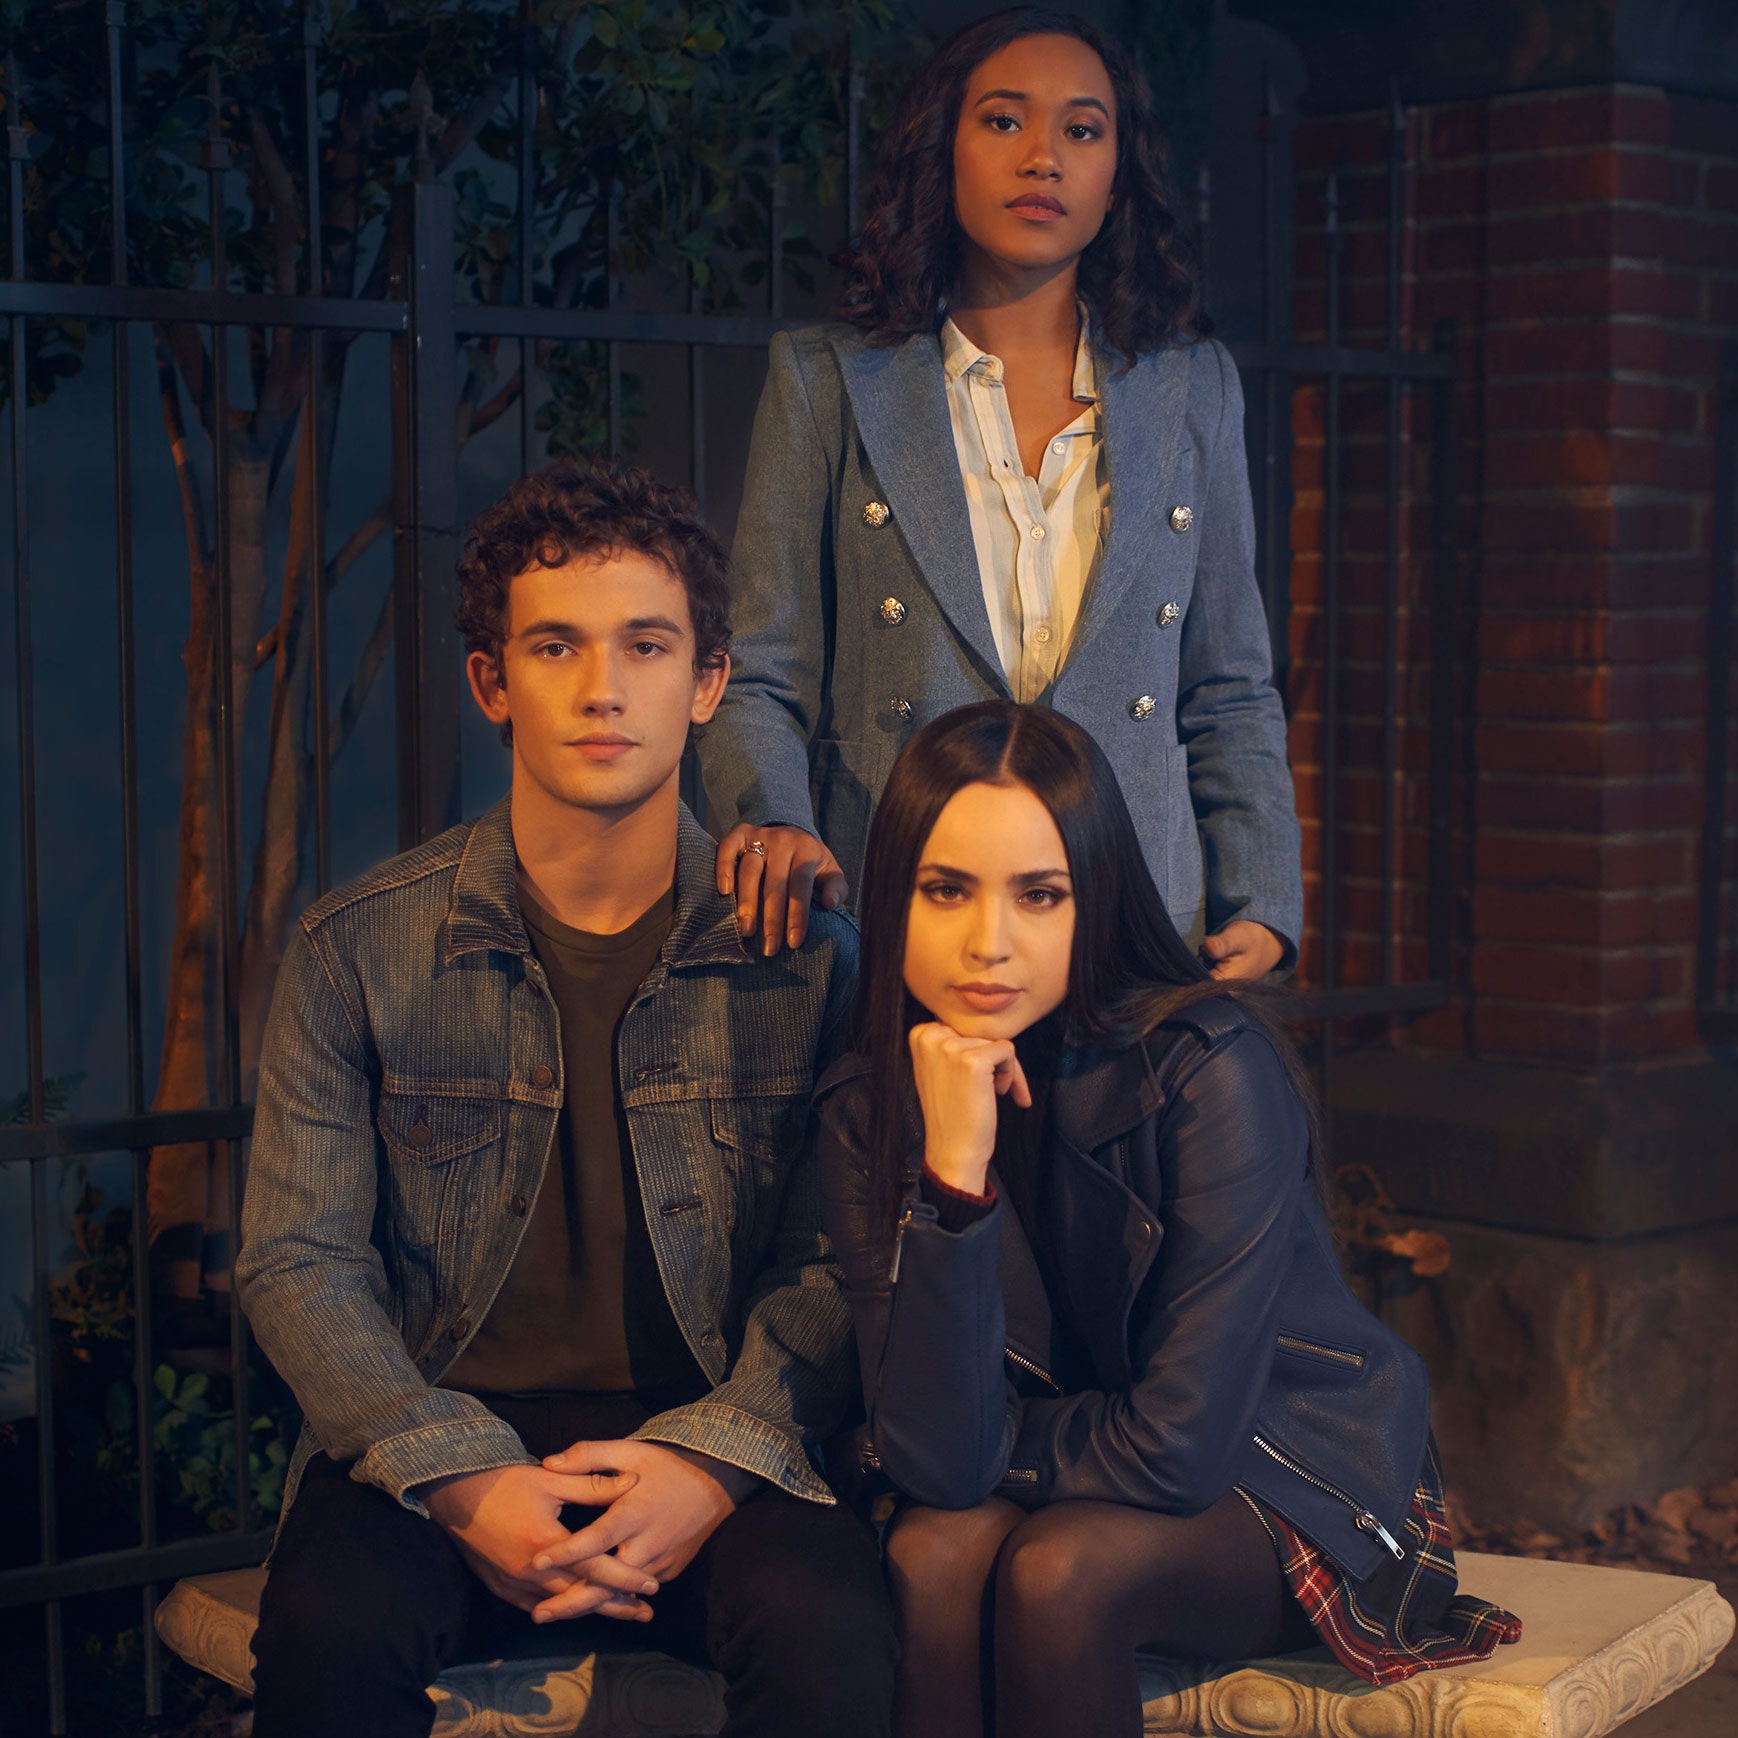 Pretty Little Liars: The Perfectionists Wallpapers